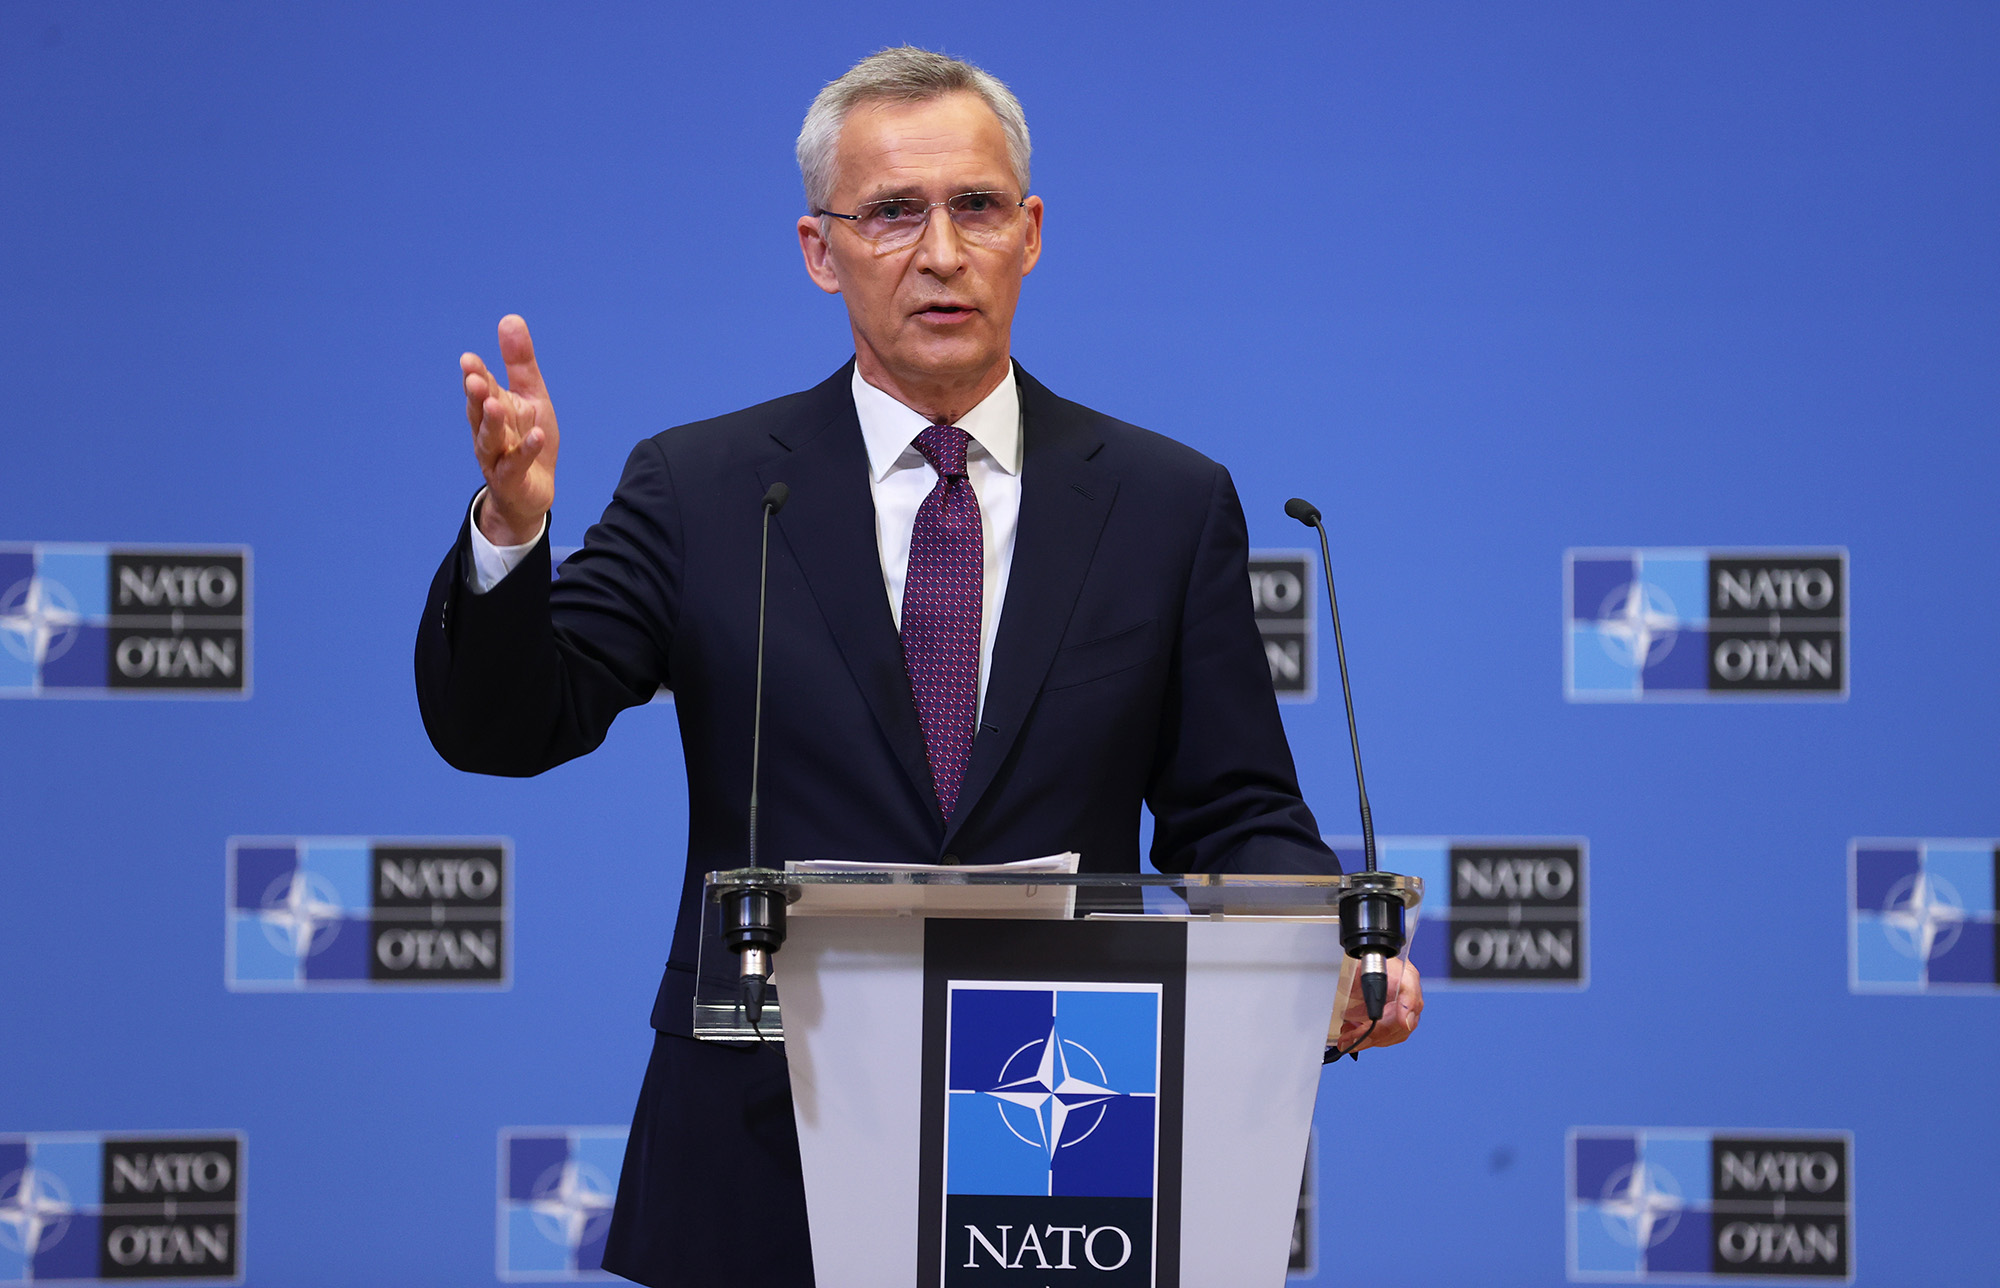 NATO Secretary General Jens Stoltenberg holds a press conference ahead of a NATO Defence ministers' meeting at the NATO headquarters in Brussels, Belgium, on June 15.